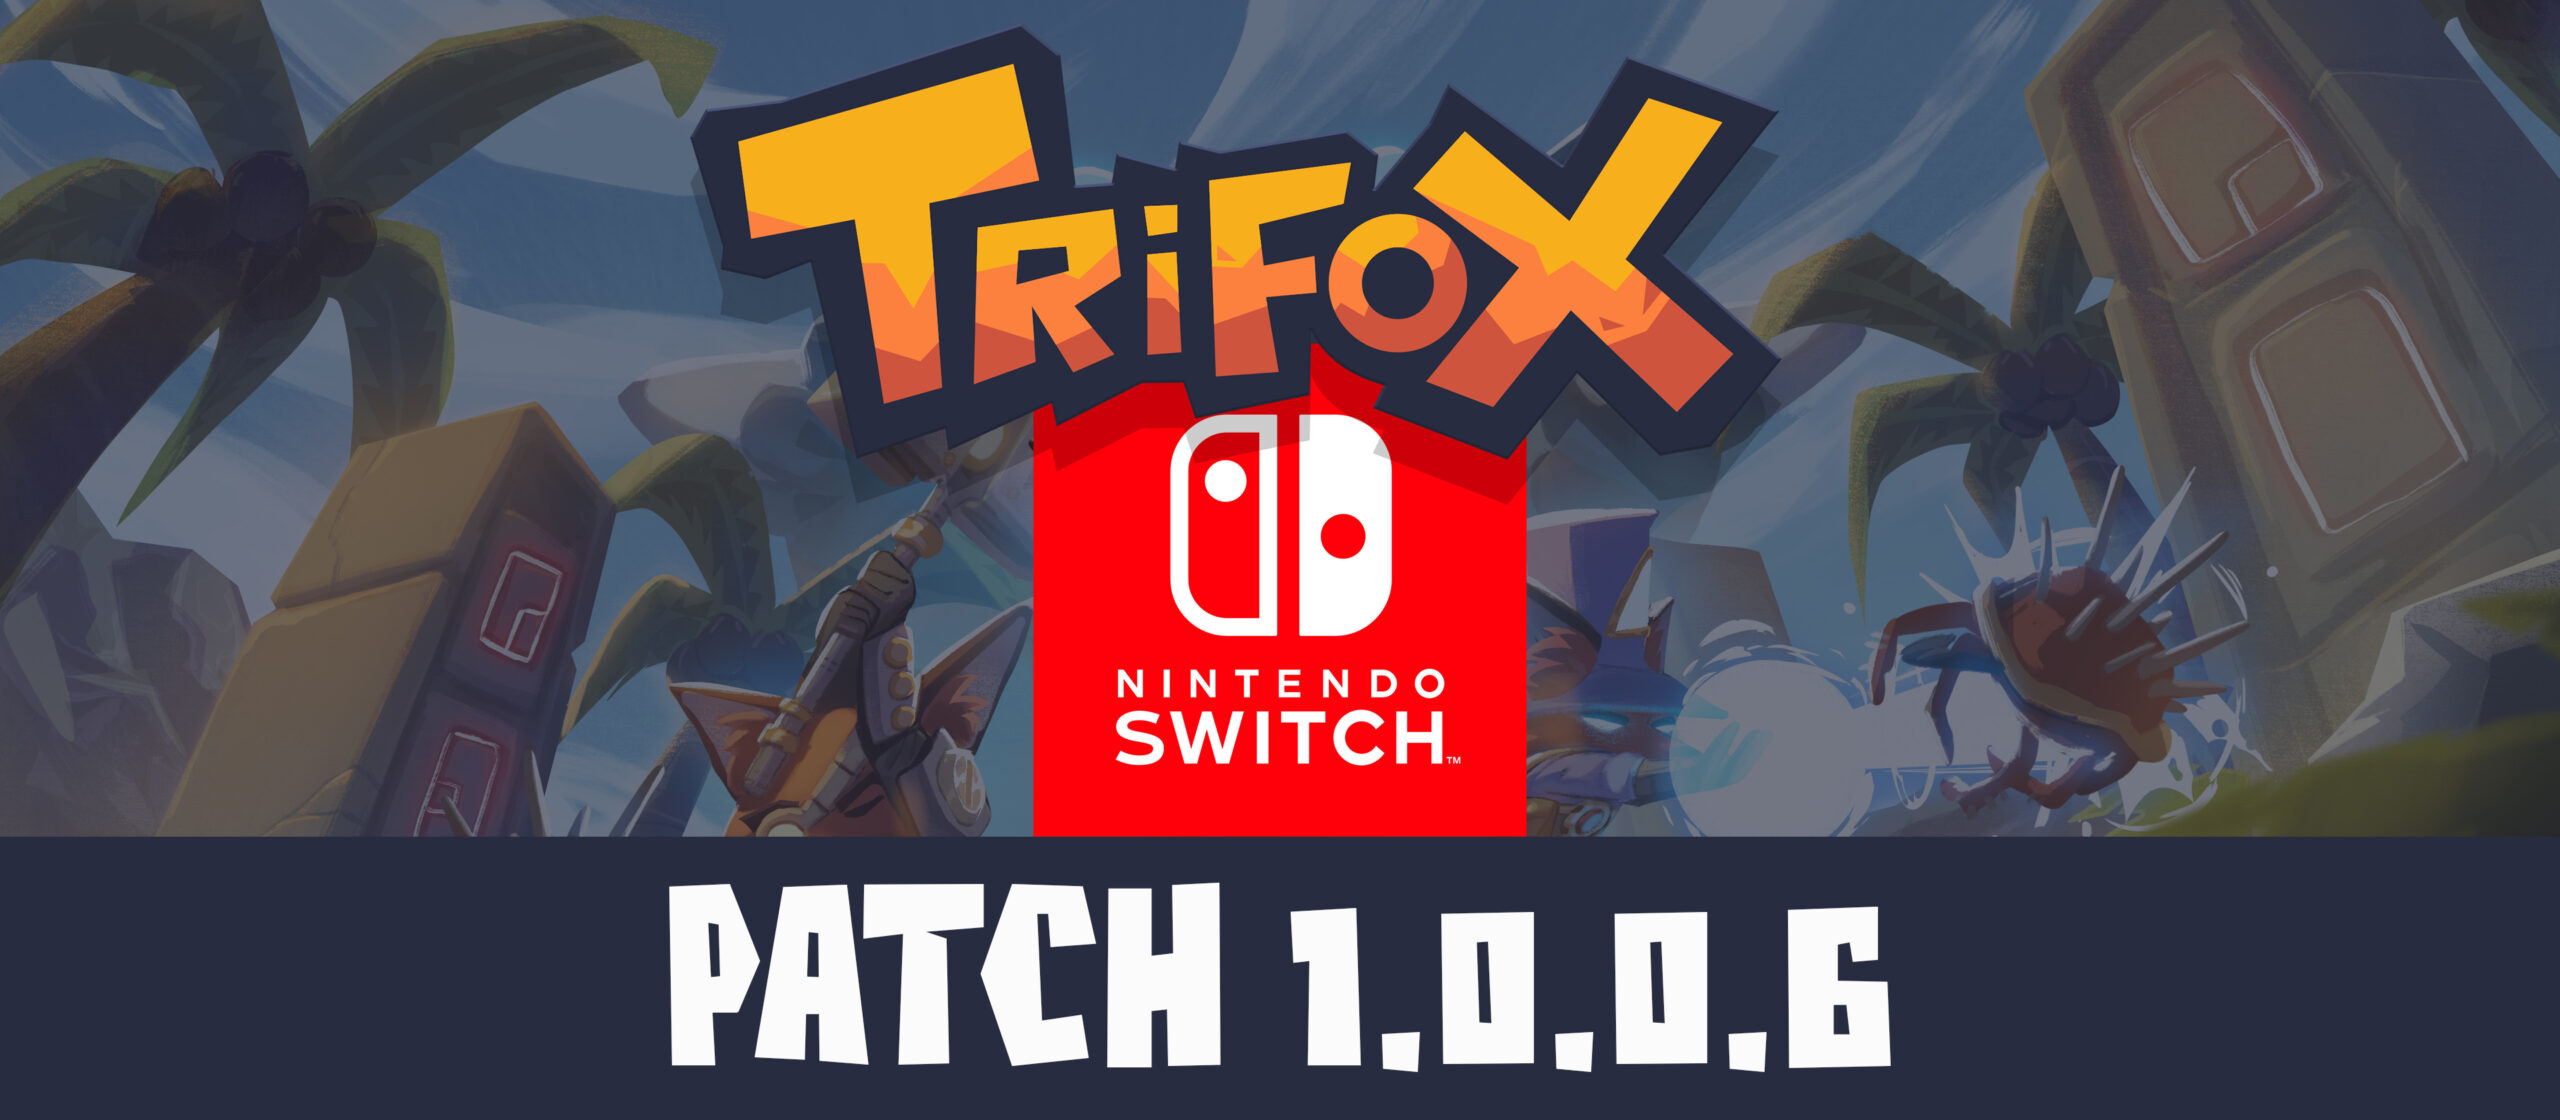 Nintendo Switch Patch 1.0.0.6 Now Live -